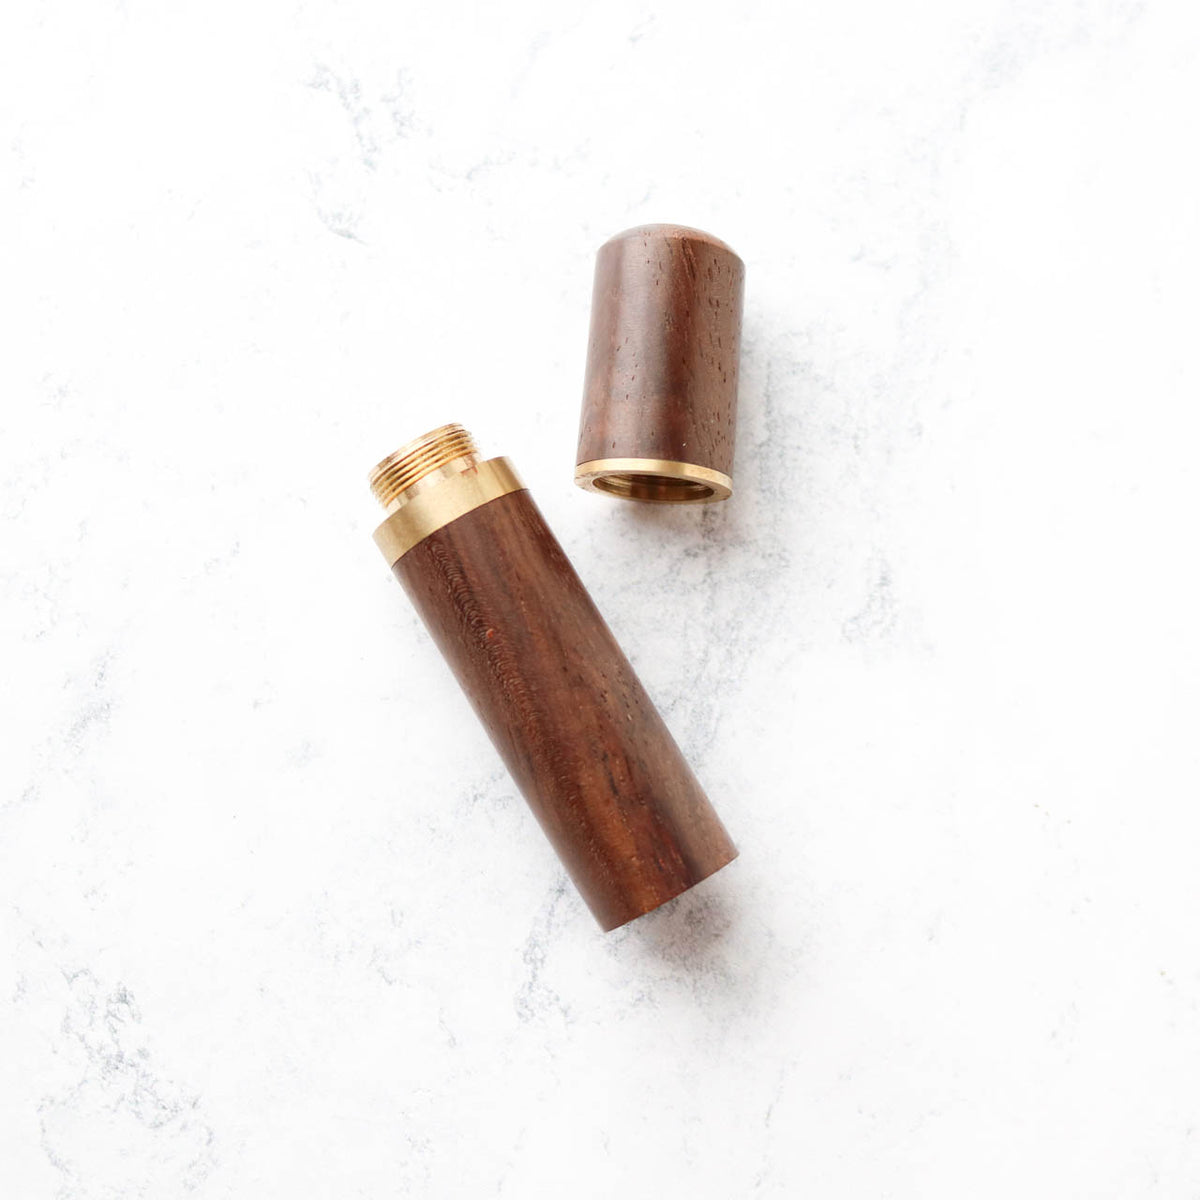 Wood Needle Case with Brass trim